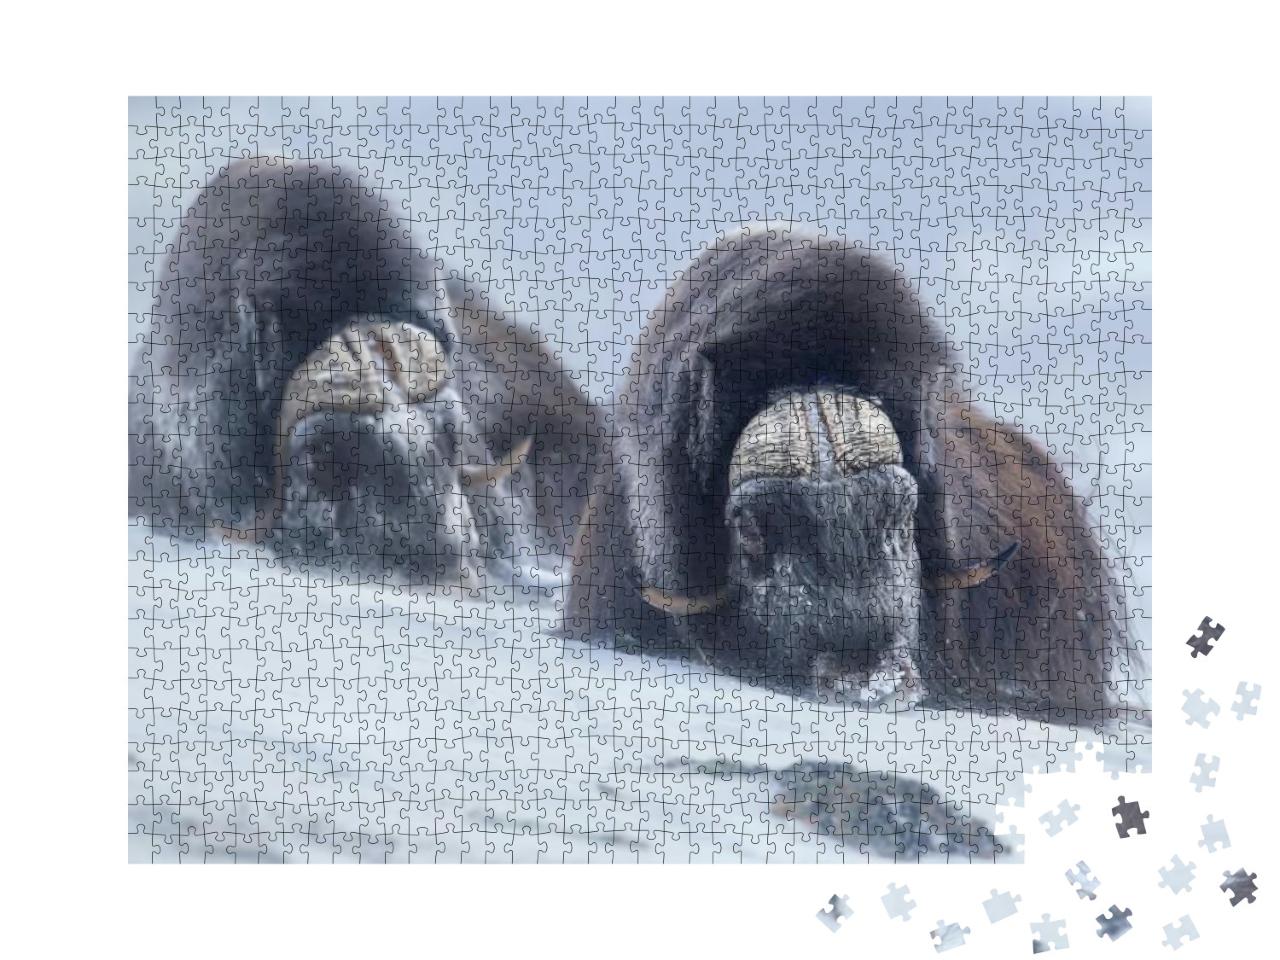 Two Large Adult Male Musk Oxen in the Mountains During To... Jigsaw Puzzle with 1000 pieces